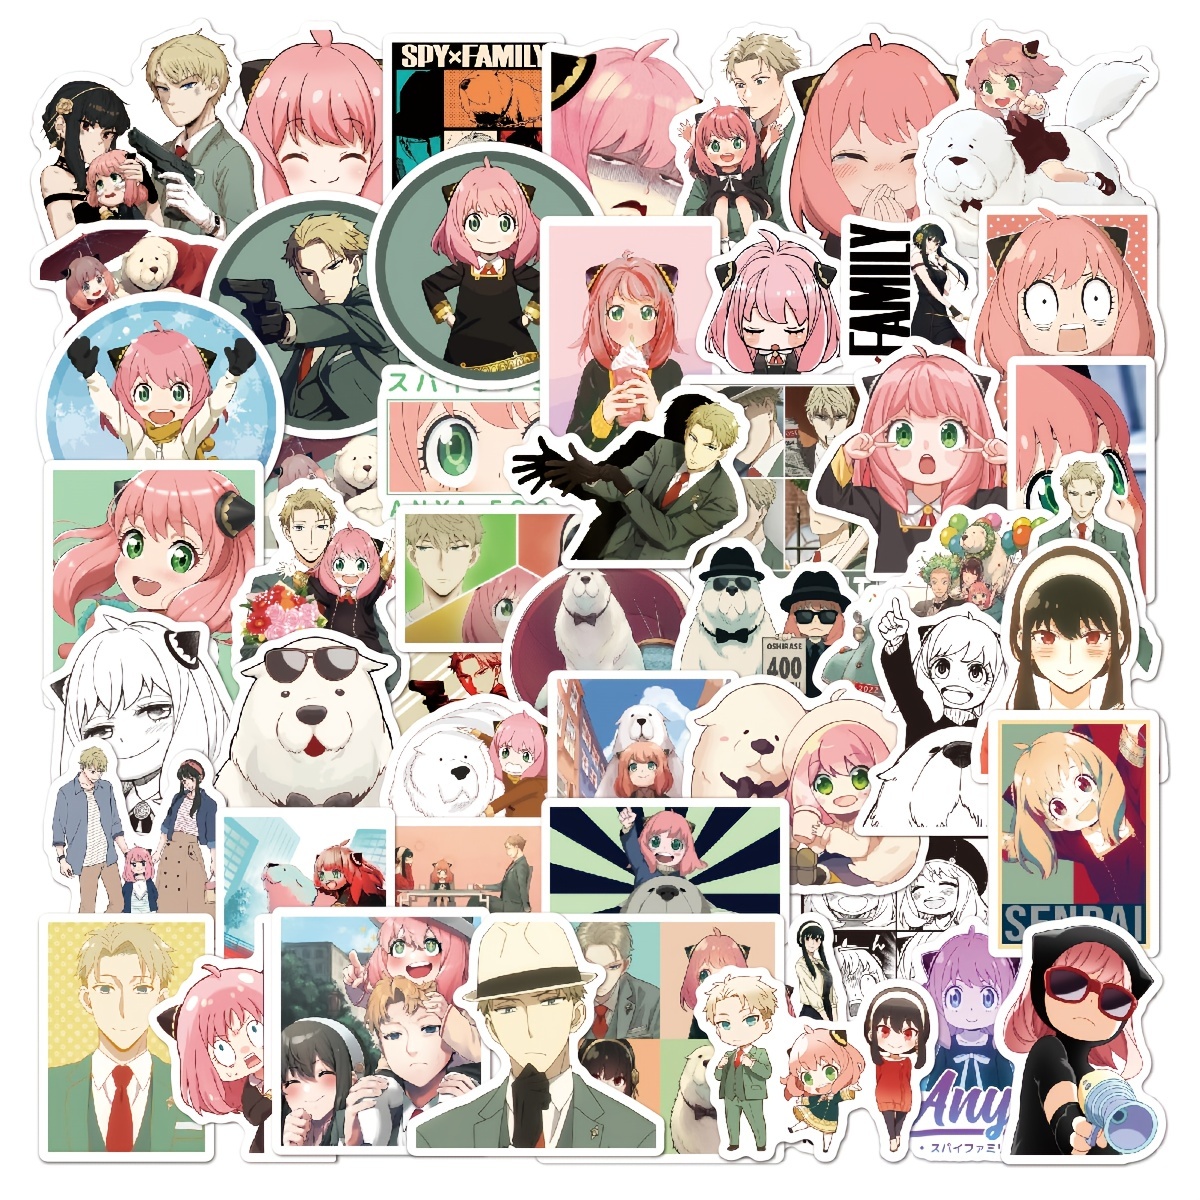 I sell anime stickers, prints and keychains. Please check out my etsy shop  ♡ : r/AnimeMerchandise